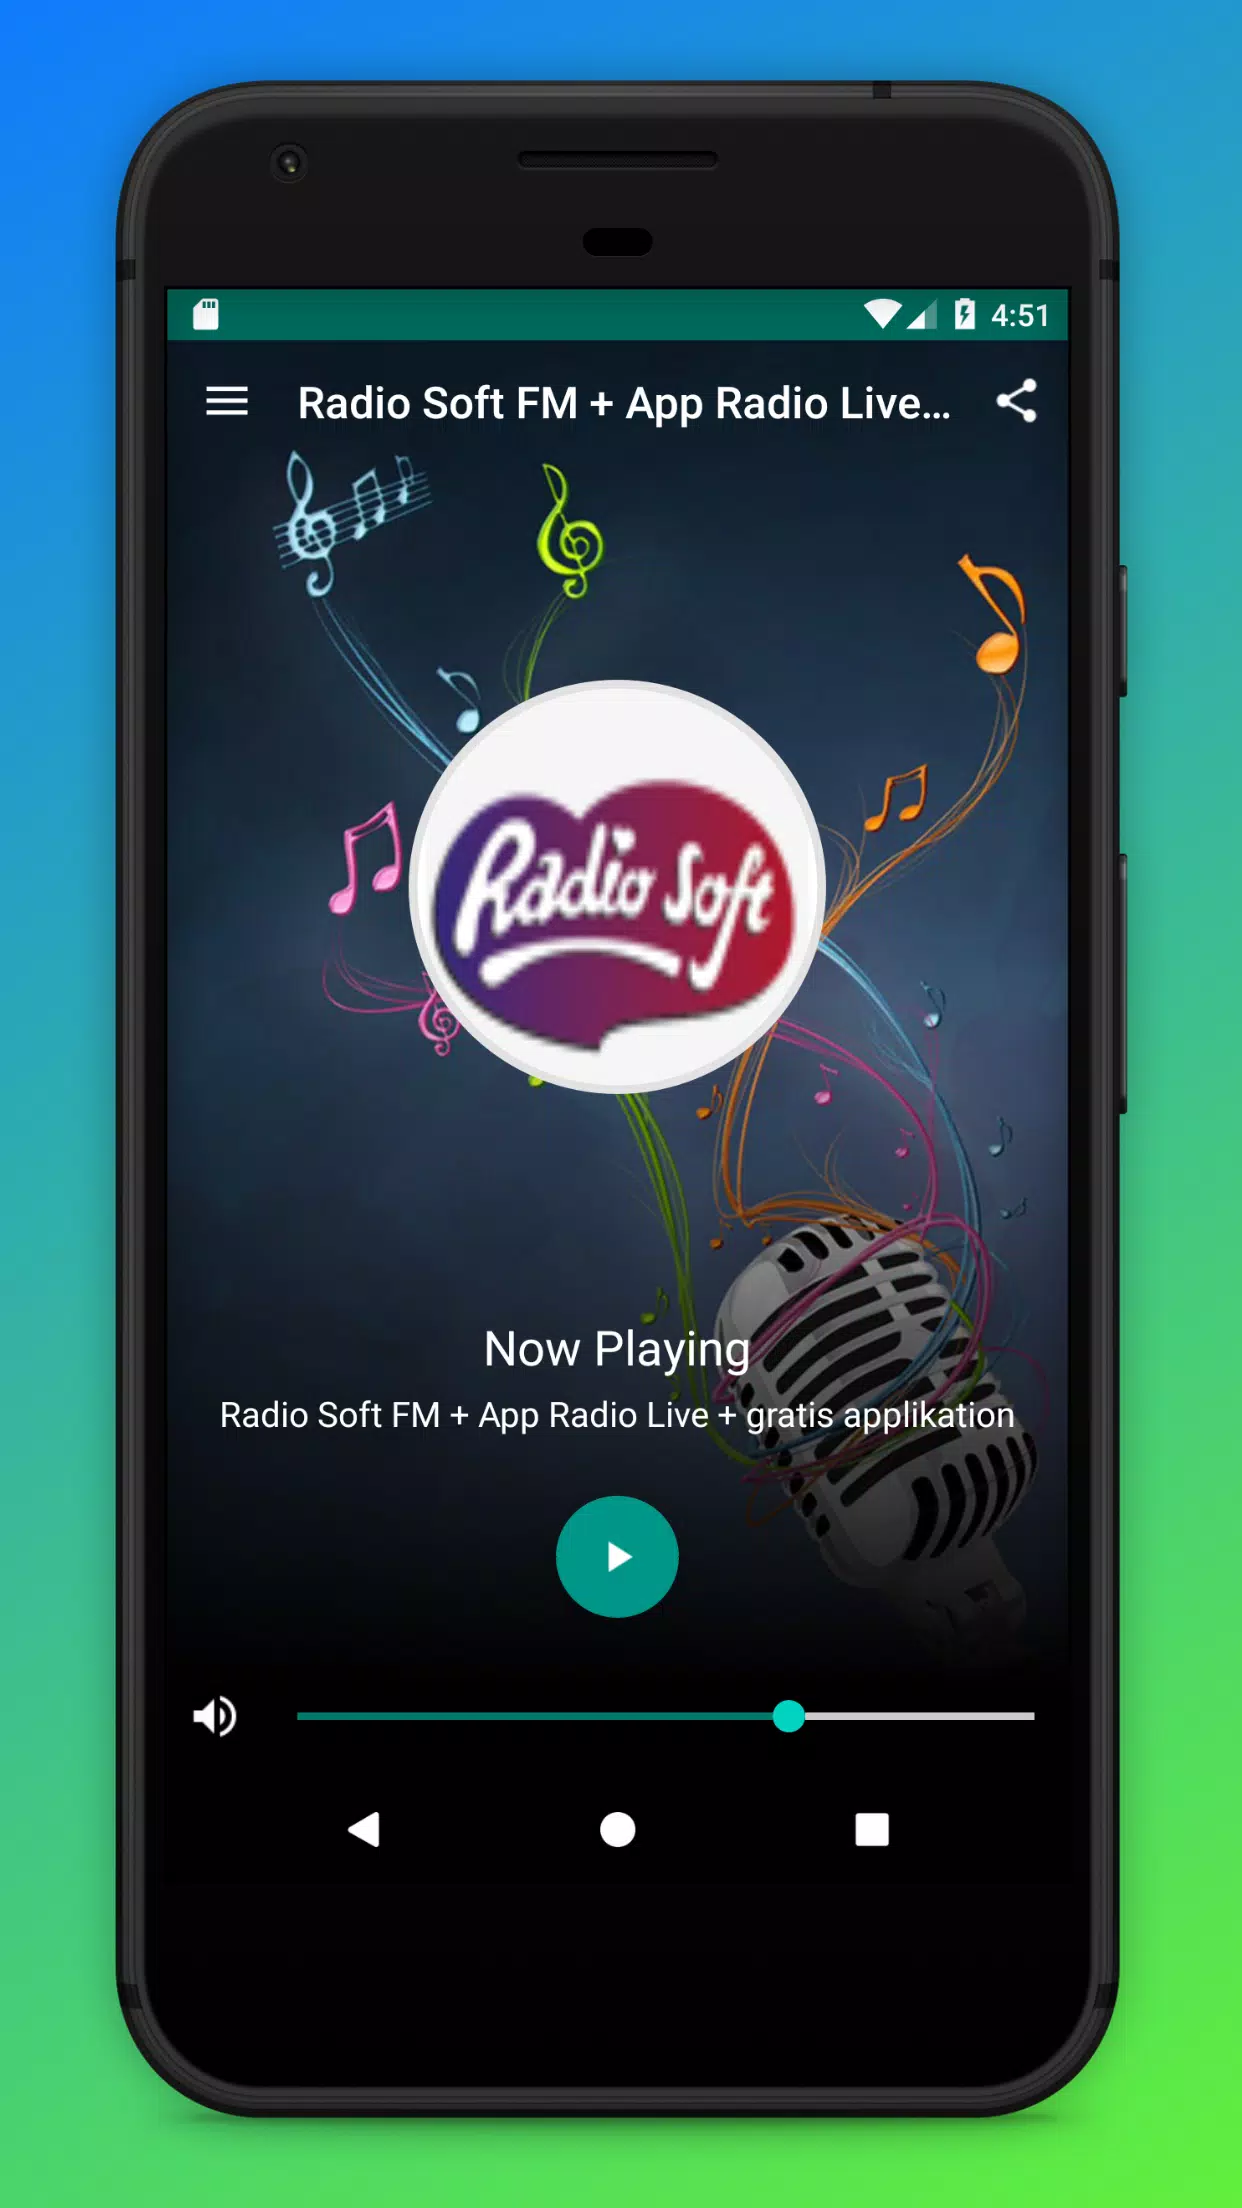 Radio Soft App Danmark Online for Android - APK Download